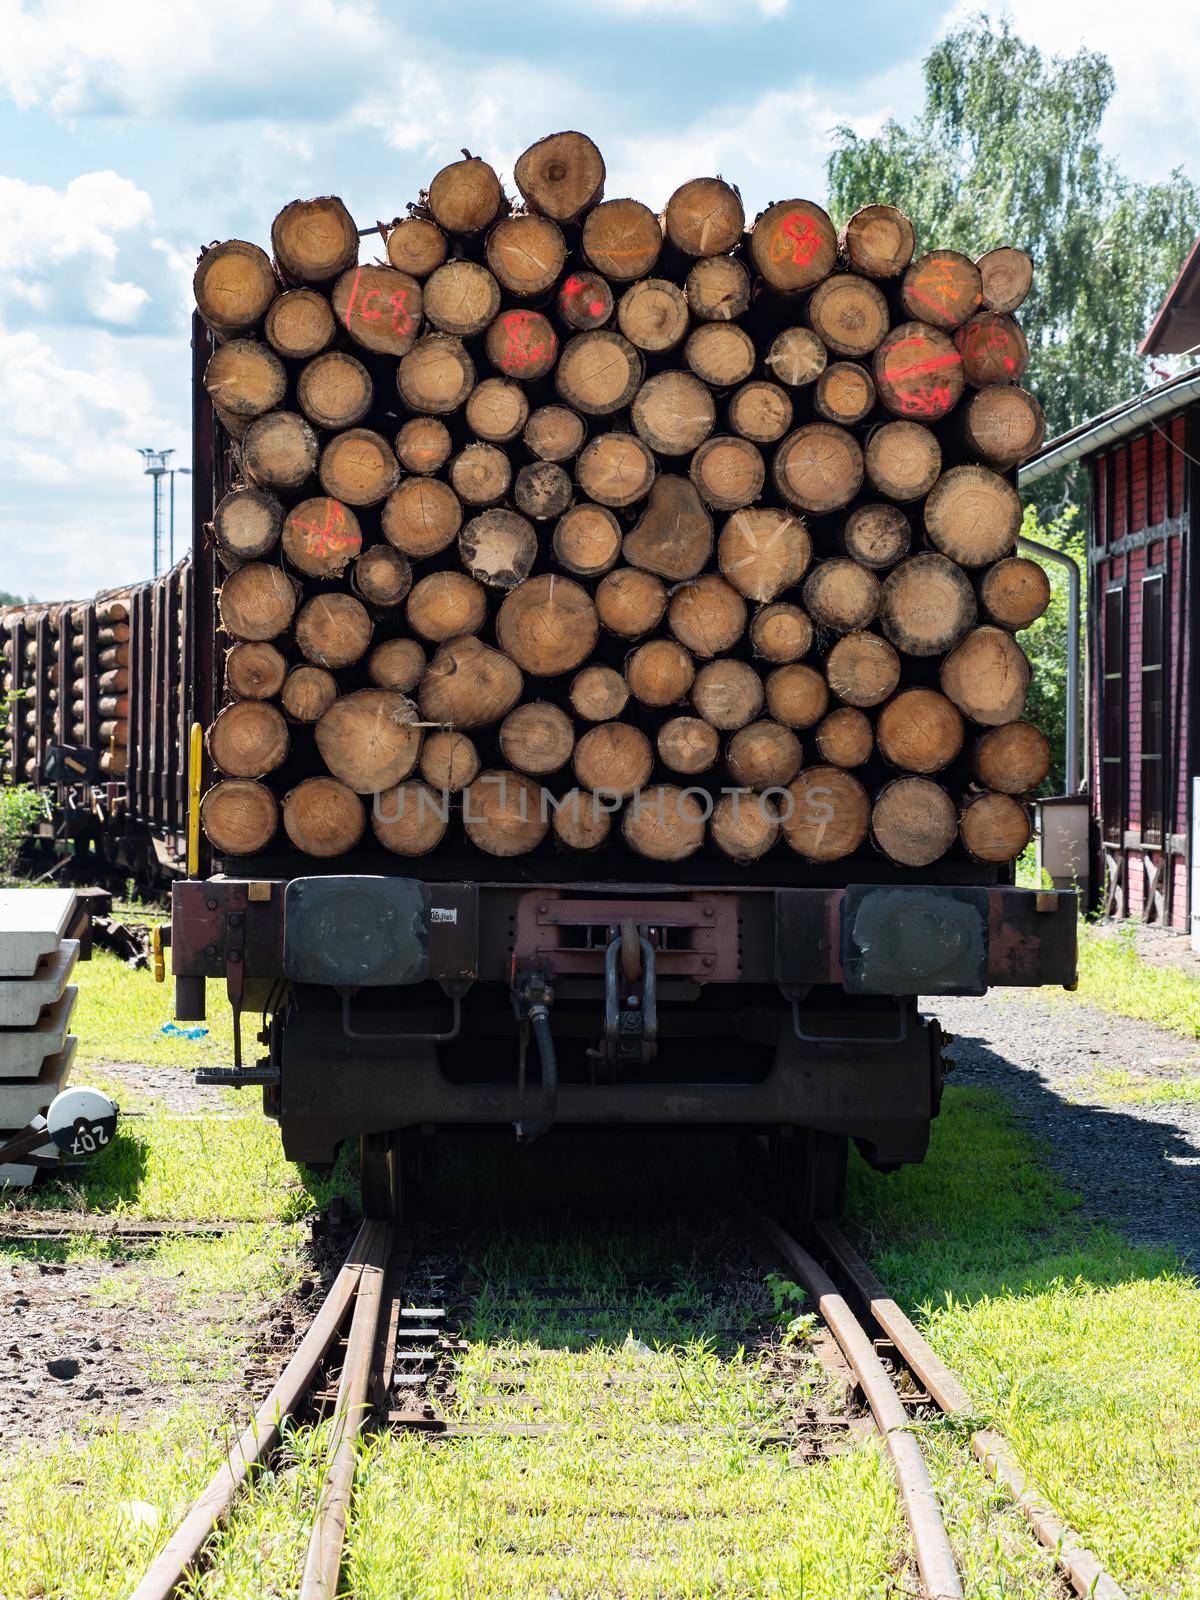 Freight cars loaded with wood logs on railway tracks. Transportation of felled forest